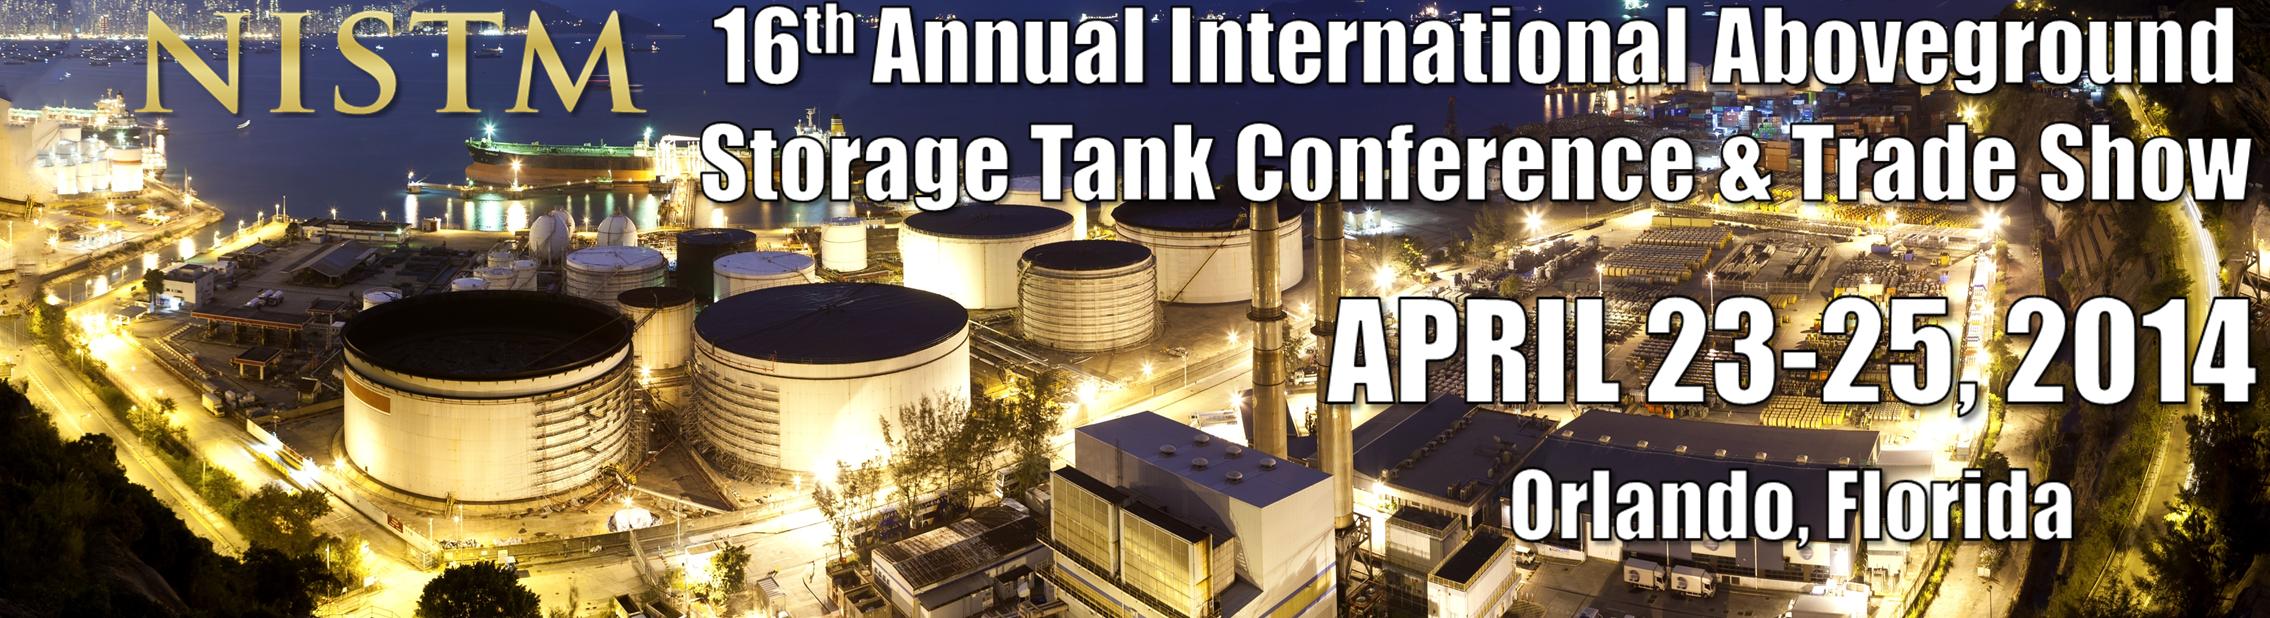 NISTM 16th Annual International Aboveground Storage Tank Conference and Trade Show